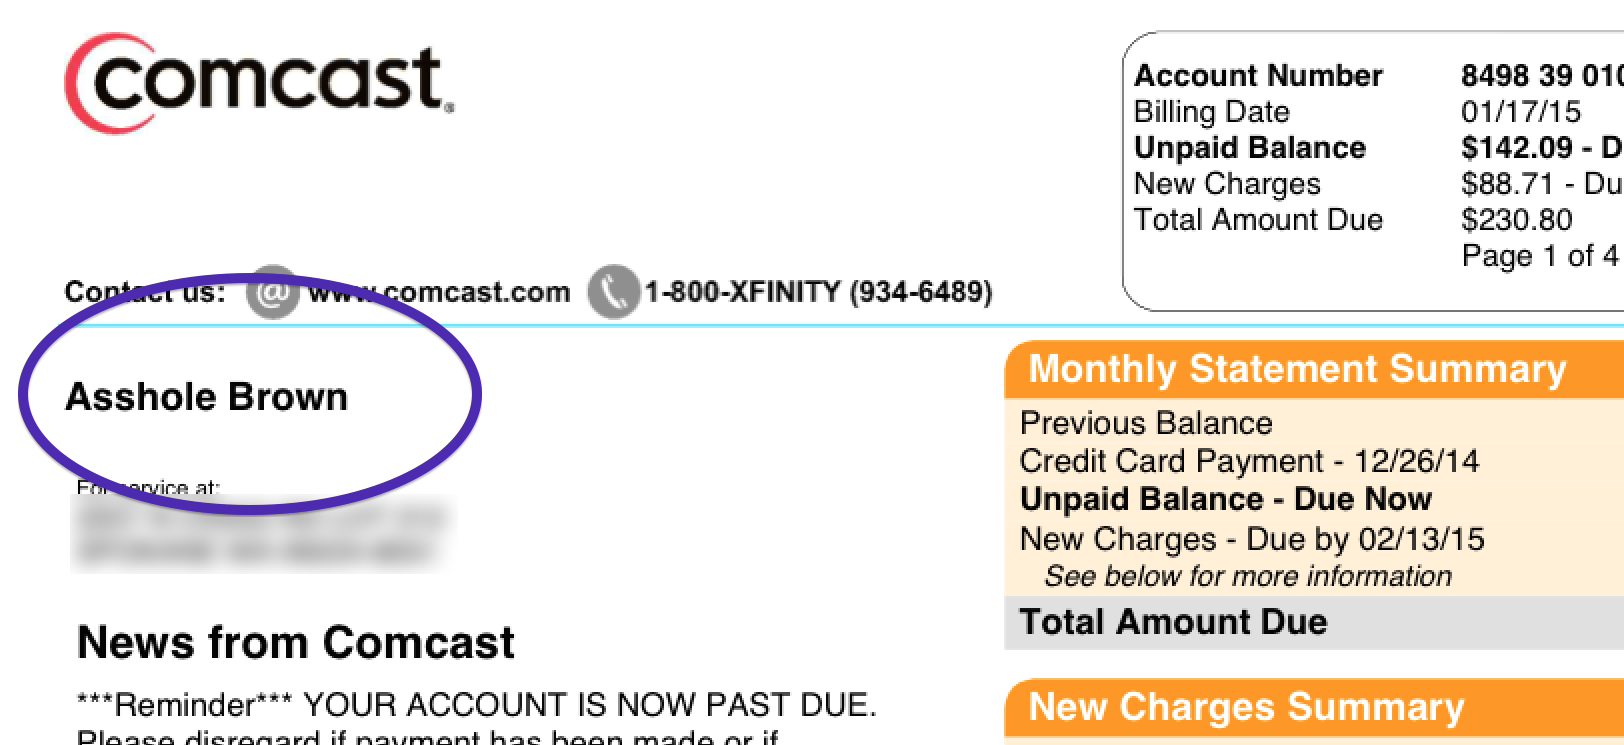 The "A**hole Brown" bill that was published last week and caused other Comcast customers to notice their account names had been tweaked. (Image via Elliott.org)